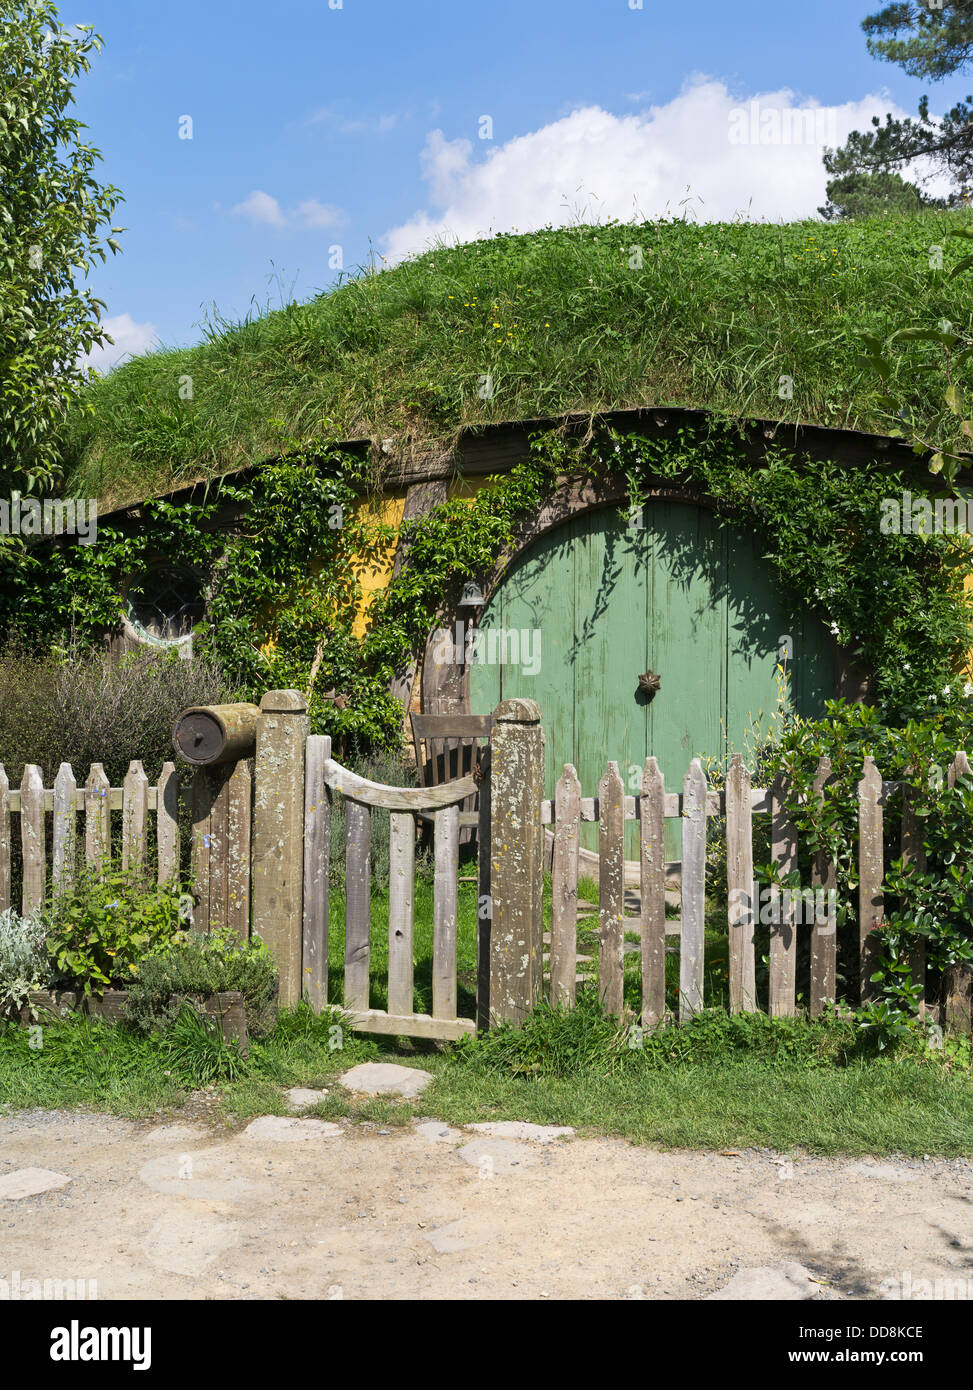 dh Lord of the Rings HOBBITON NEW ZEALAND Hobbits cottage door film set movie site films hobbit house Stock Photo